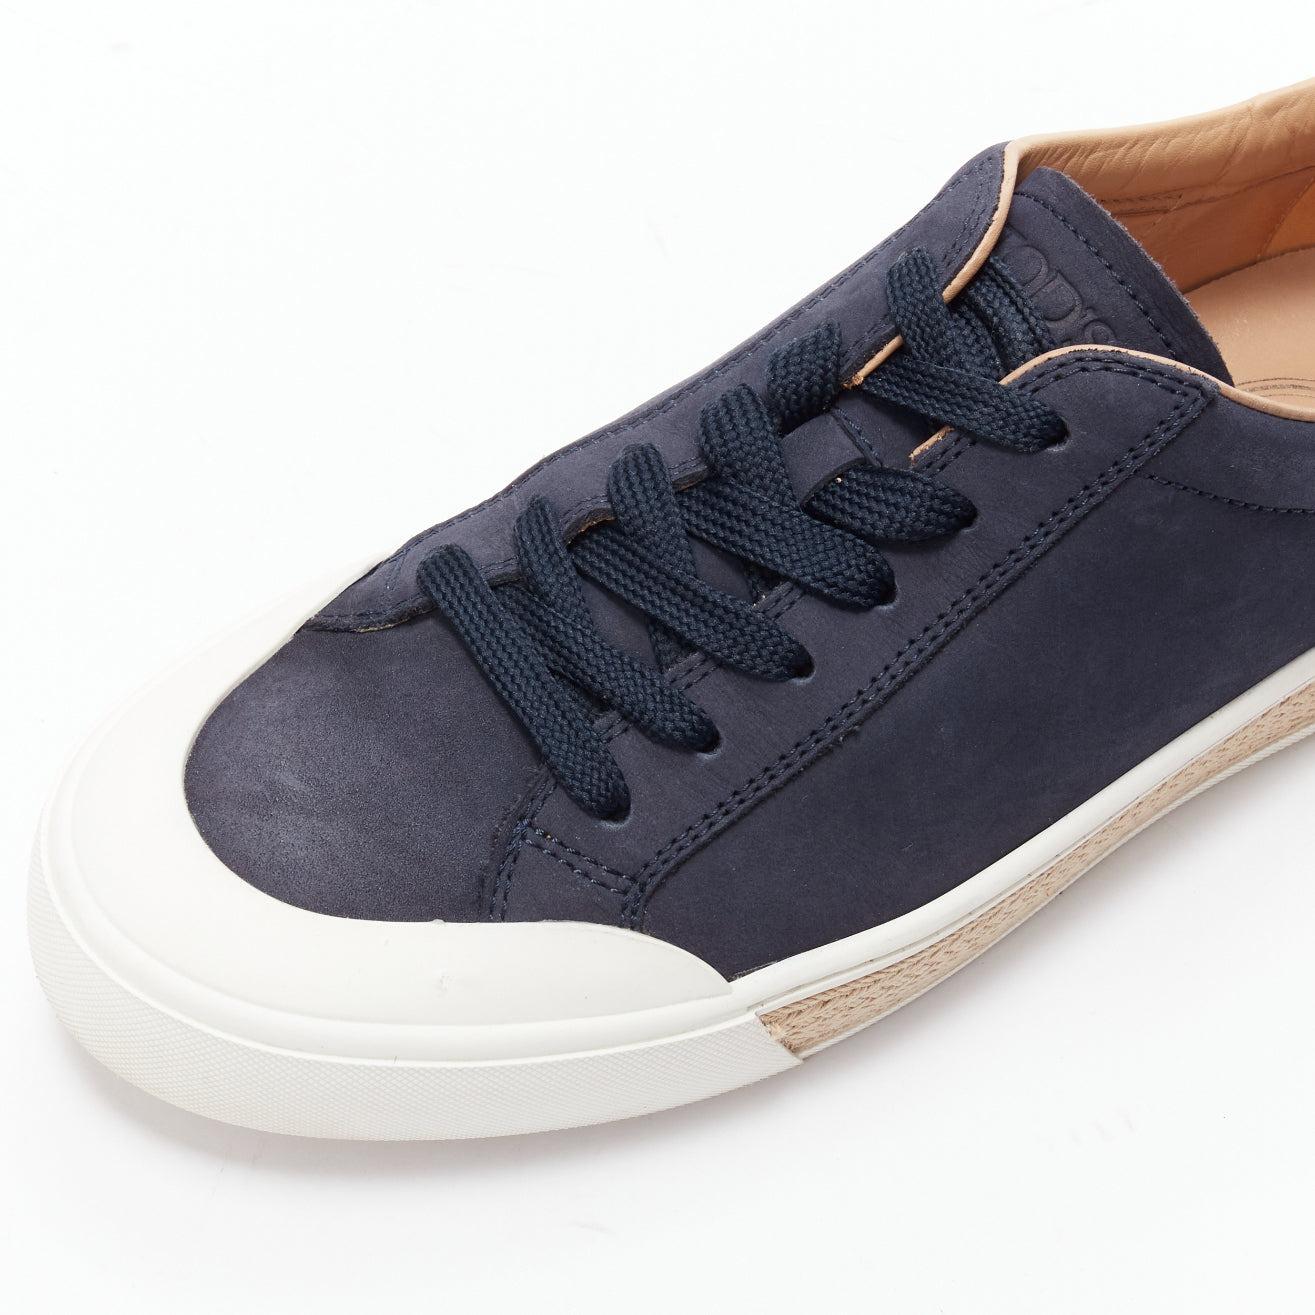 TOD'S navy suede leather espadrille sole low top sneakers UK7.5 EU41.5 2